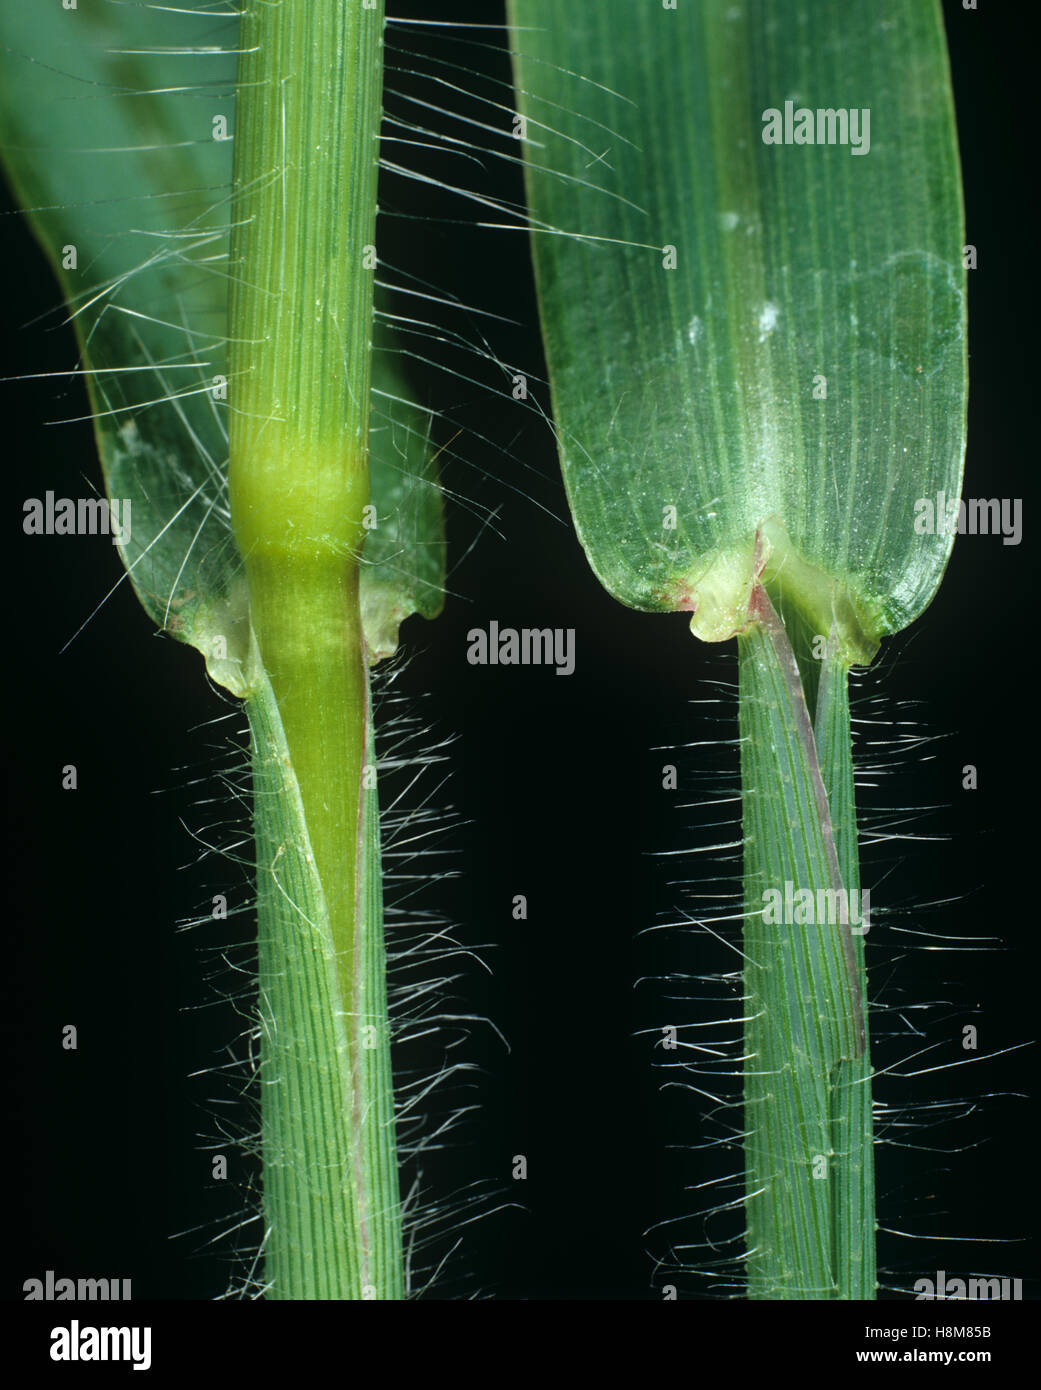 Large or hairy crabgrass, Digitaria, sanguinalis, leaf ligule, node and leafstalk of agricultural weed grass Stock Photo